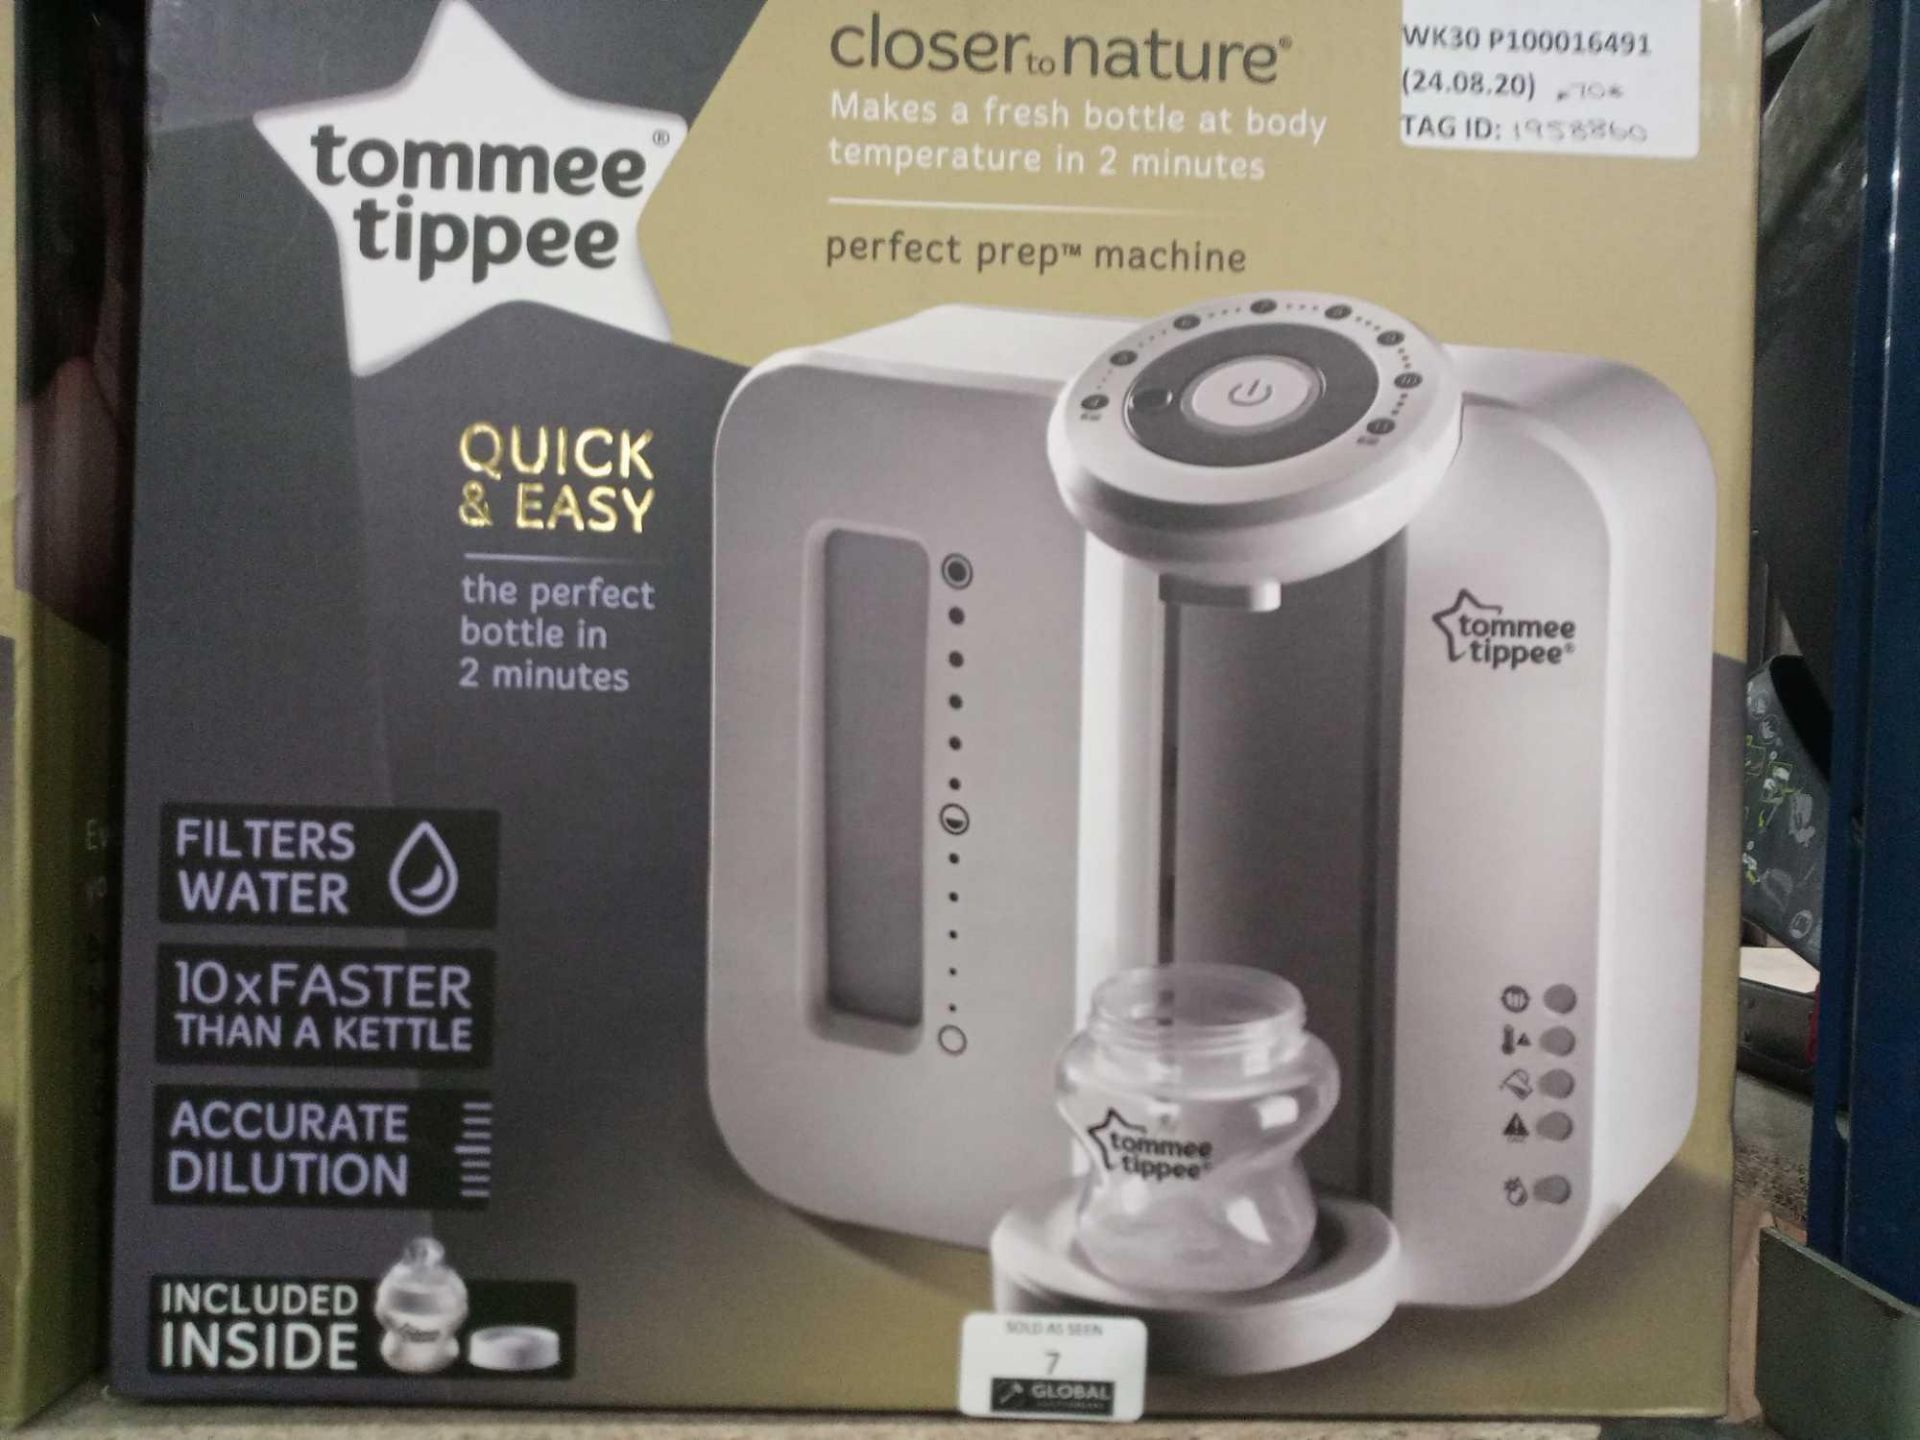 Rrp £70 Boxed Tommee Tippee Closer To Nature Perfect Preparation Bottle Warming Station In White